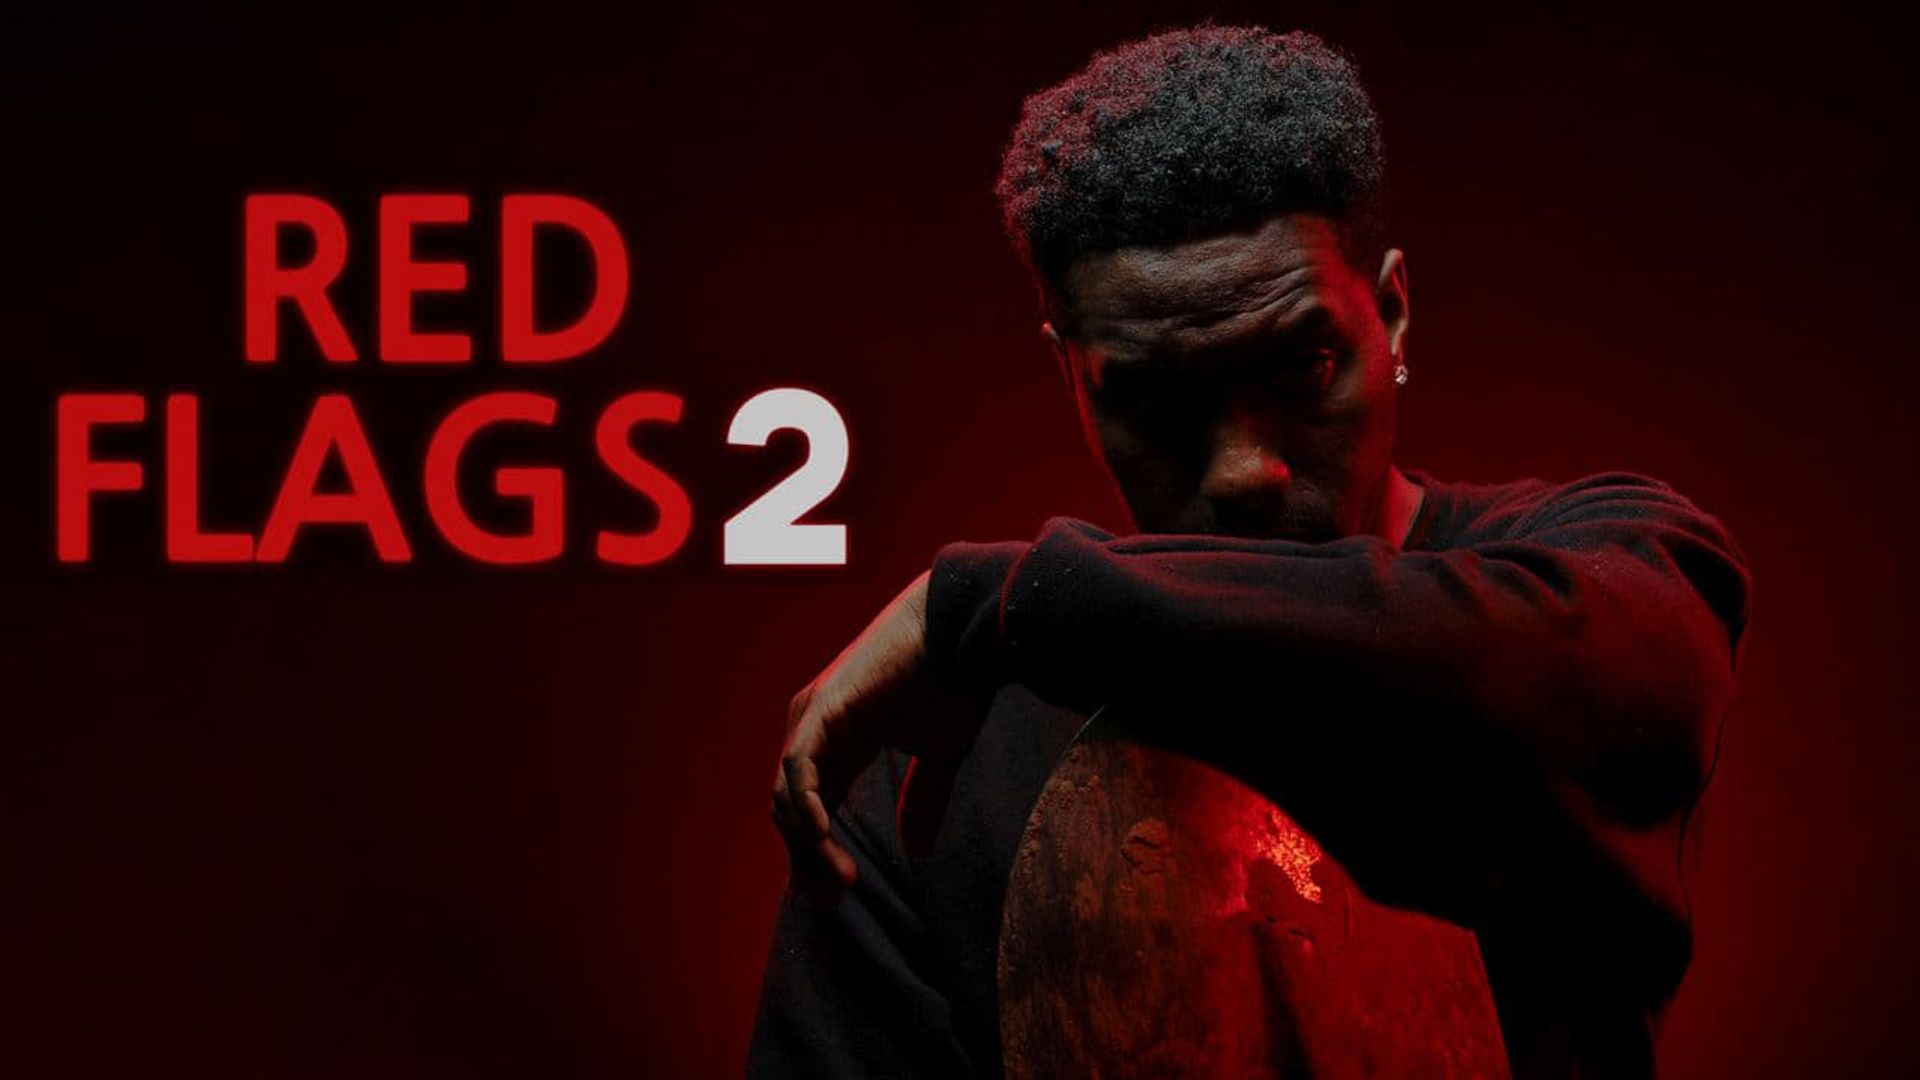 Red Flags 2 background